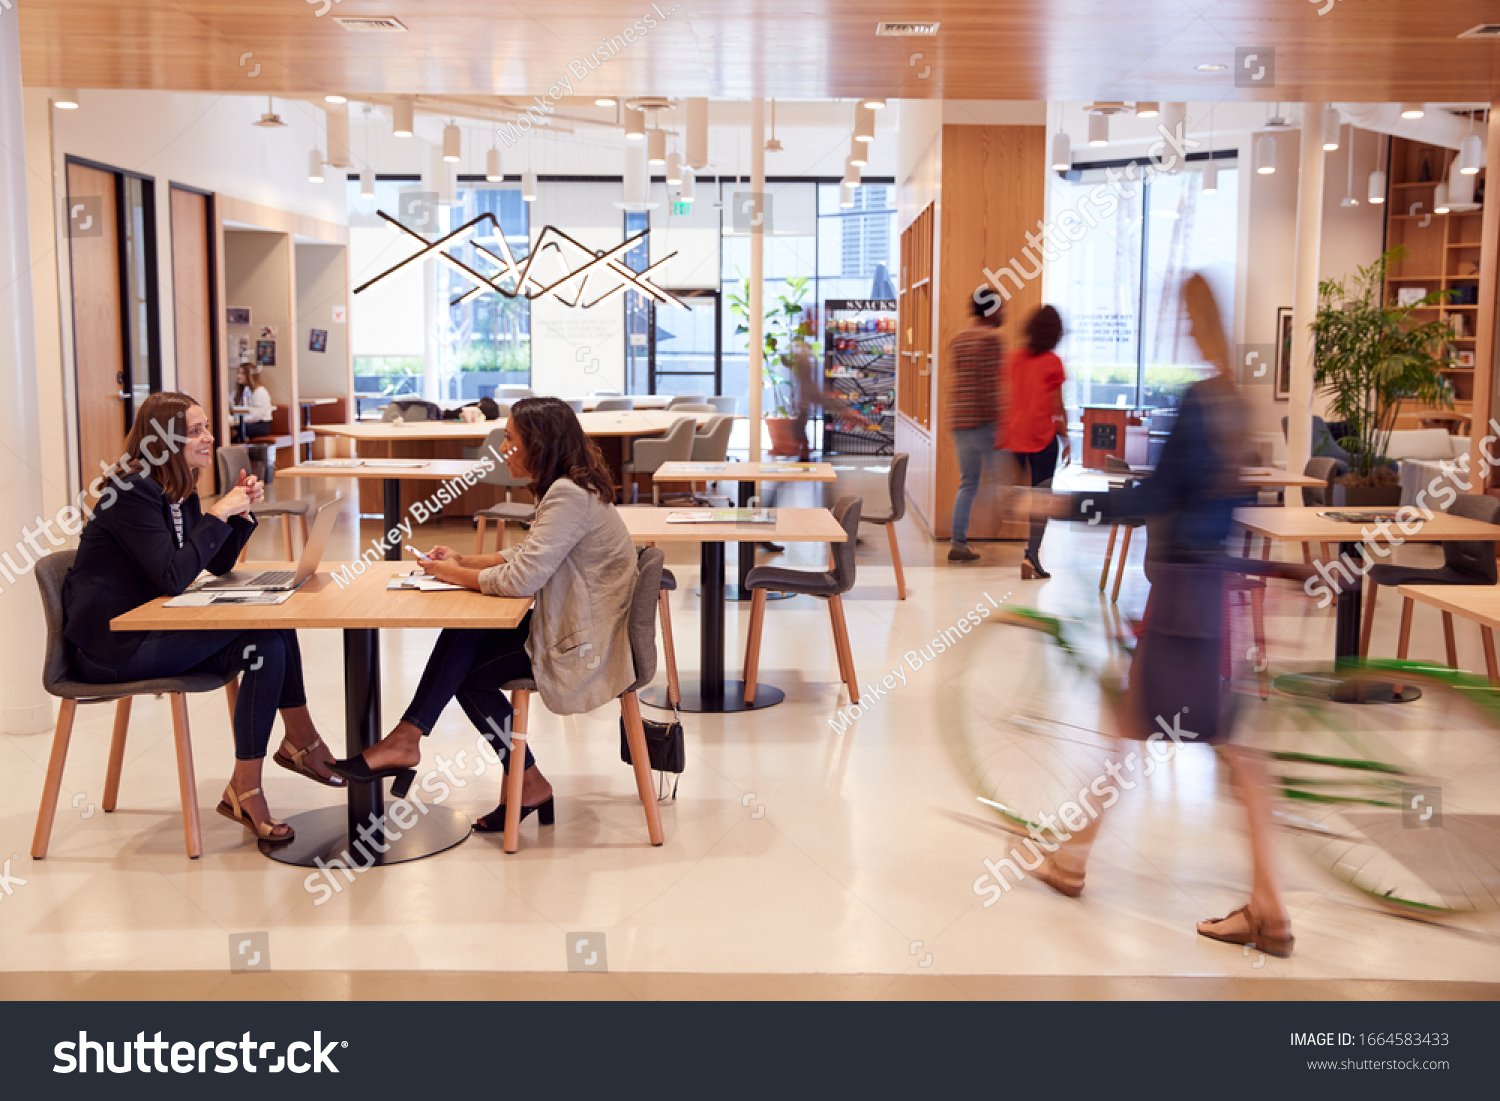 Interior Of Modern Open Plan Office With People Working And Commuters Arriving On Bikes #1664583433